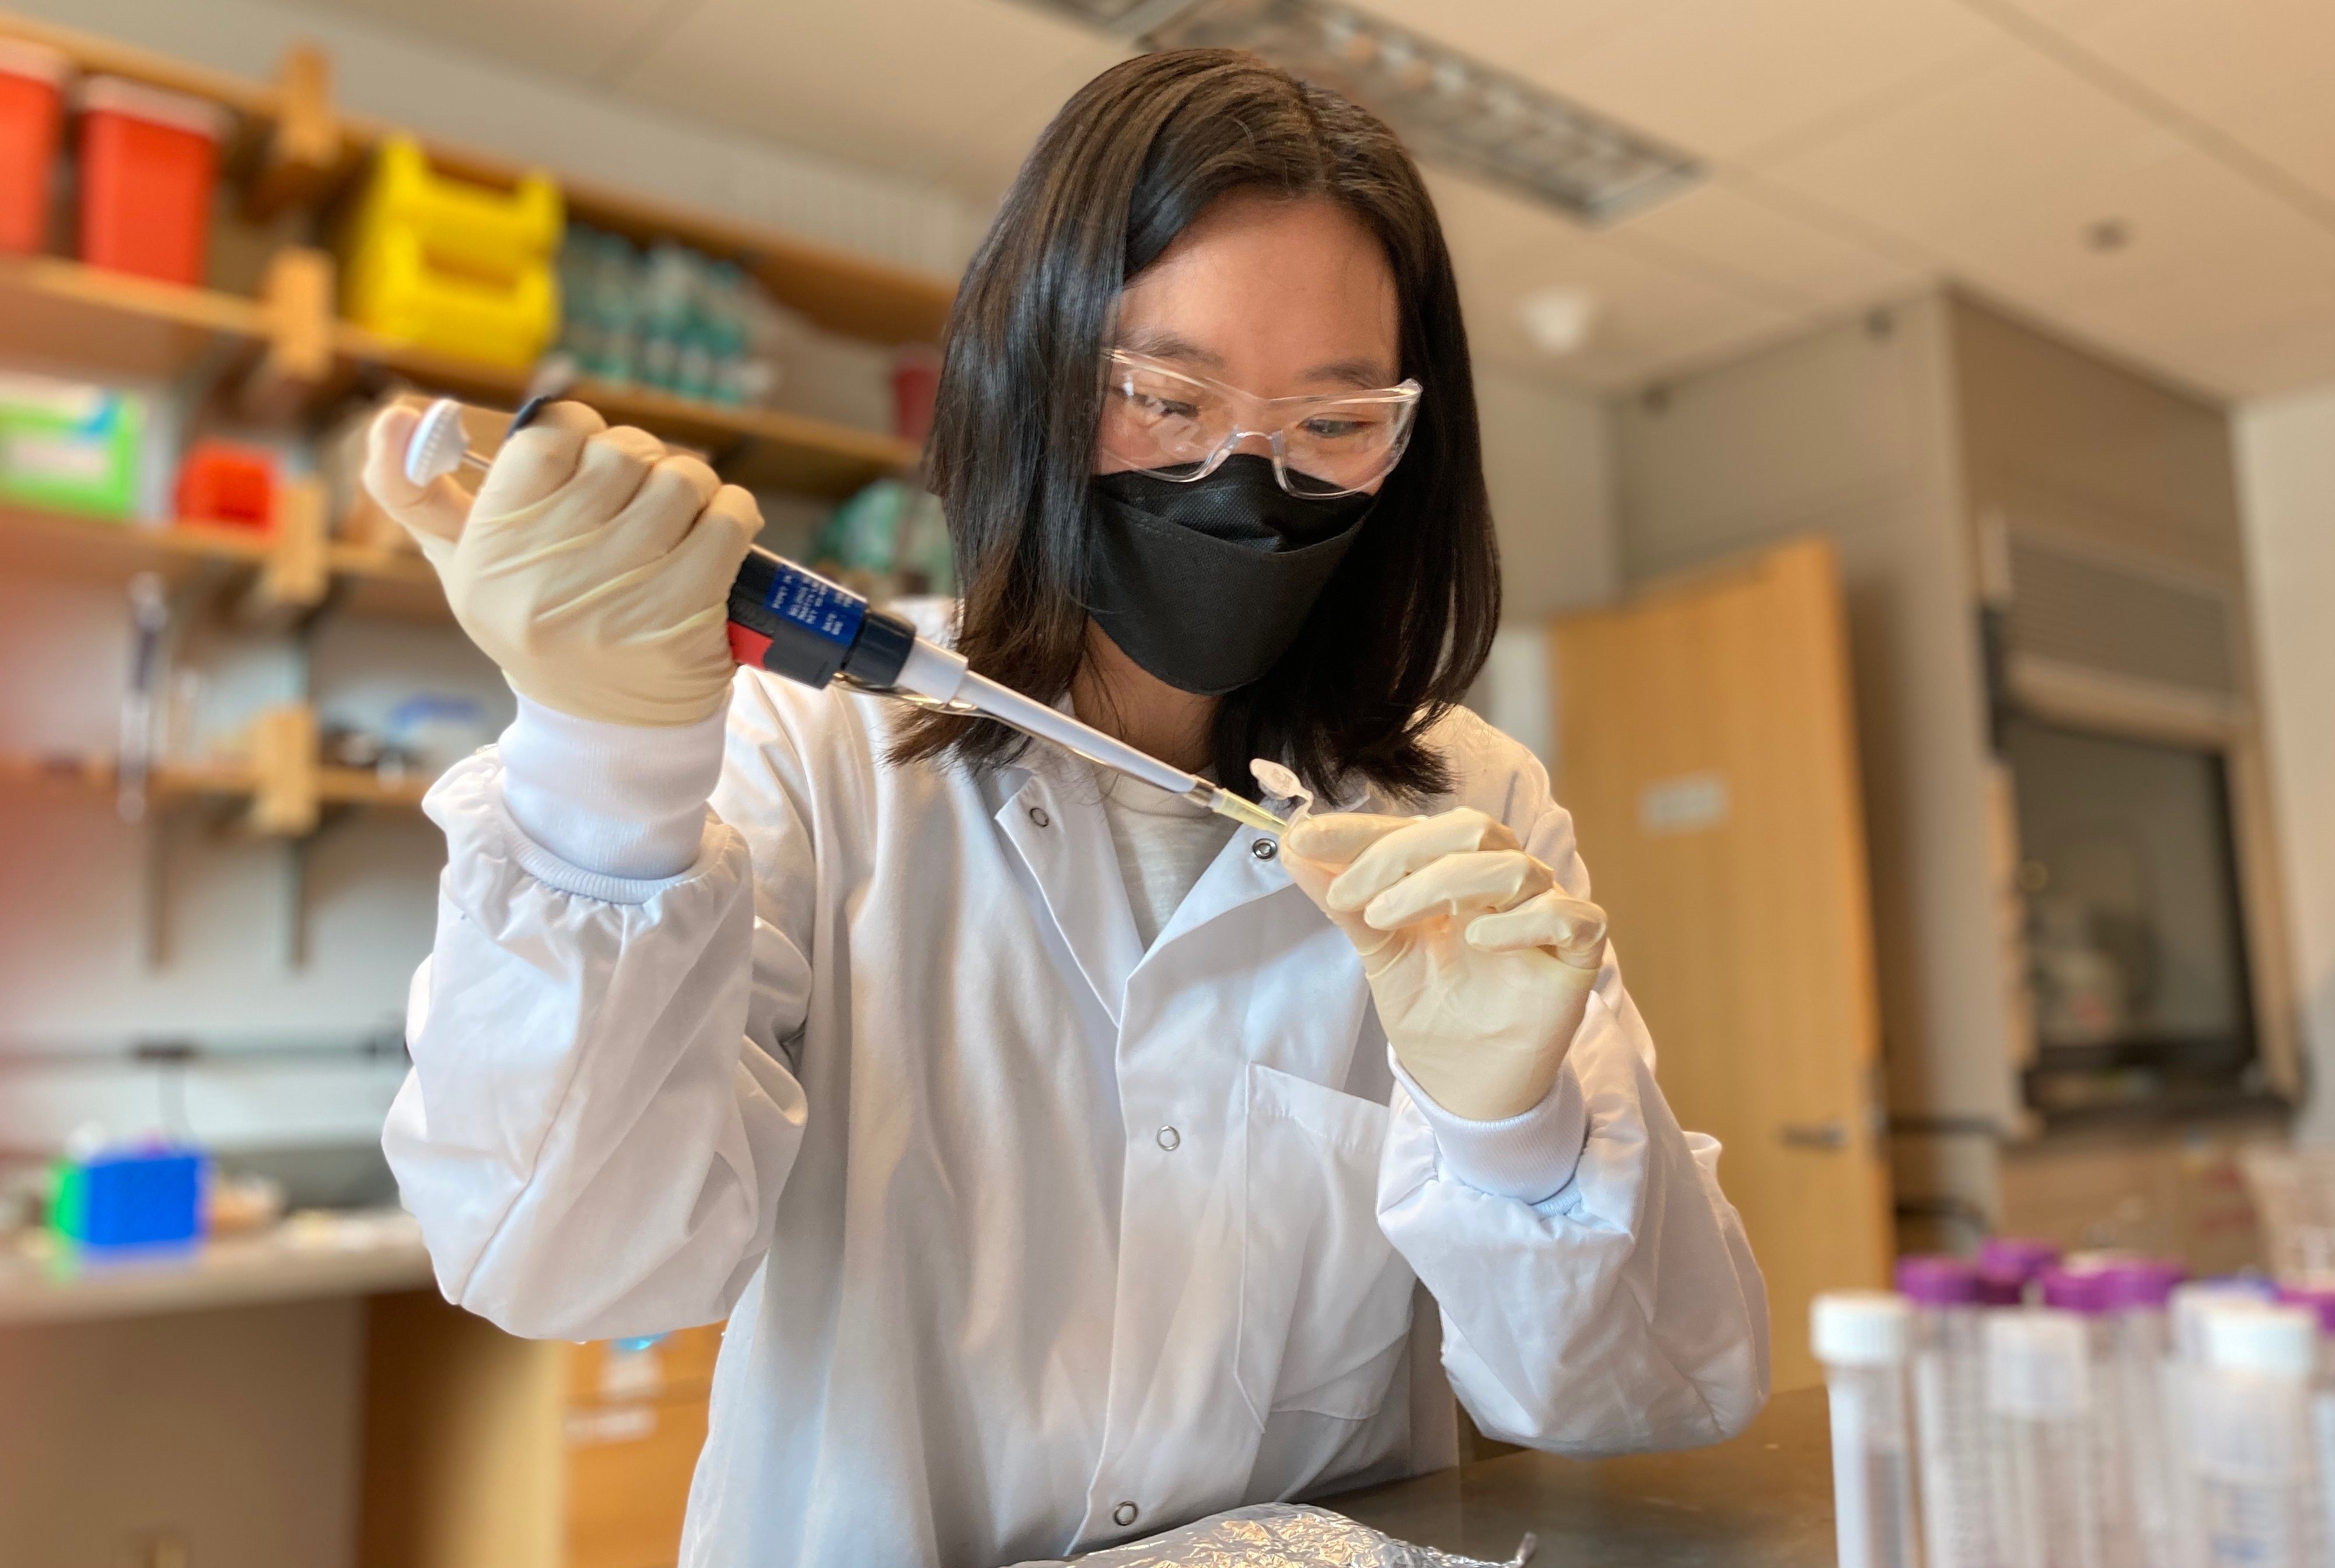 Graduate student Anna Yeh works in the lab during her biopharma internship.